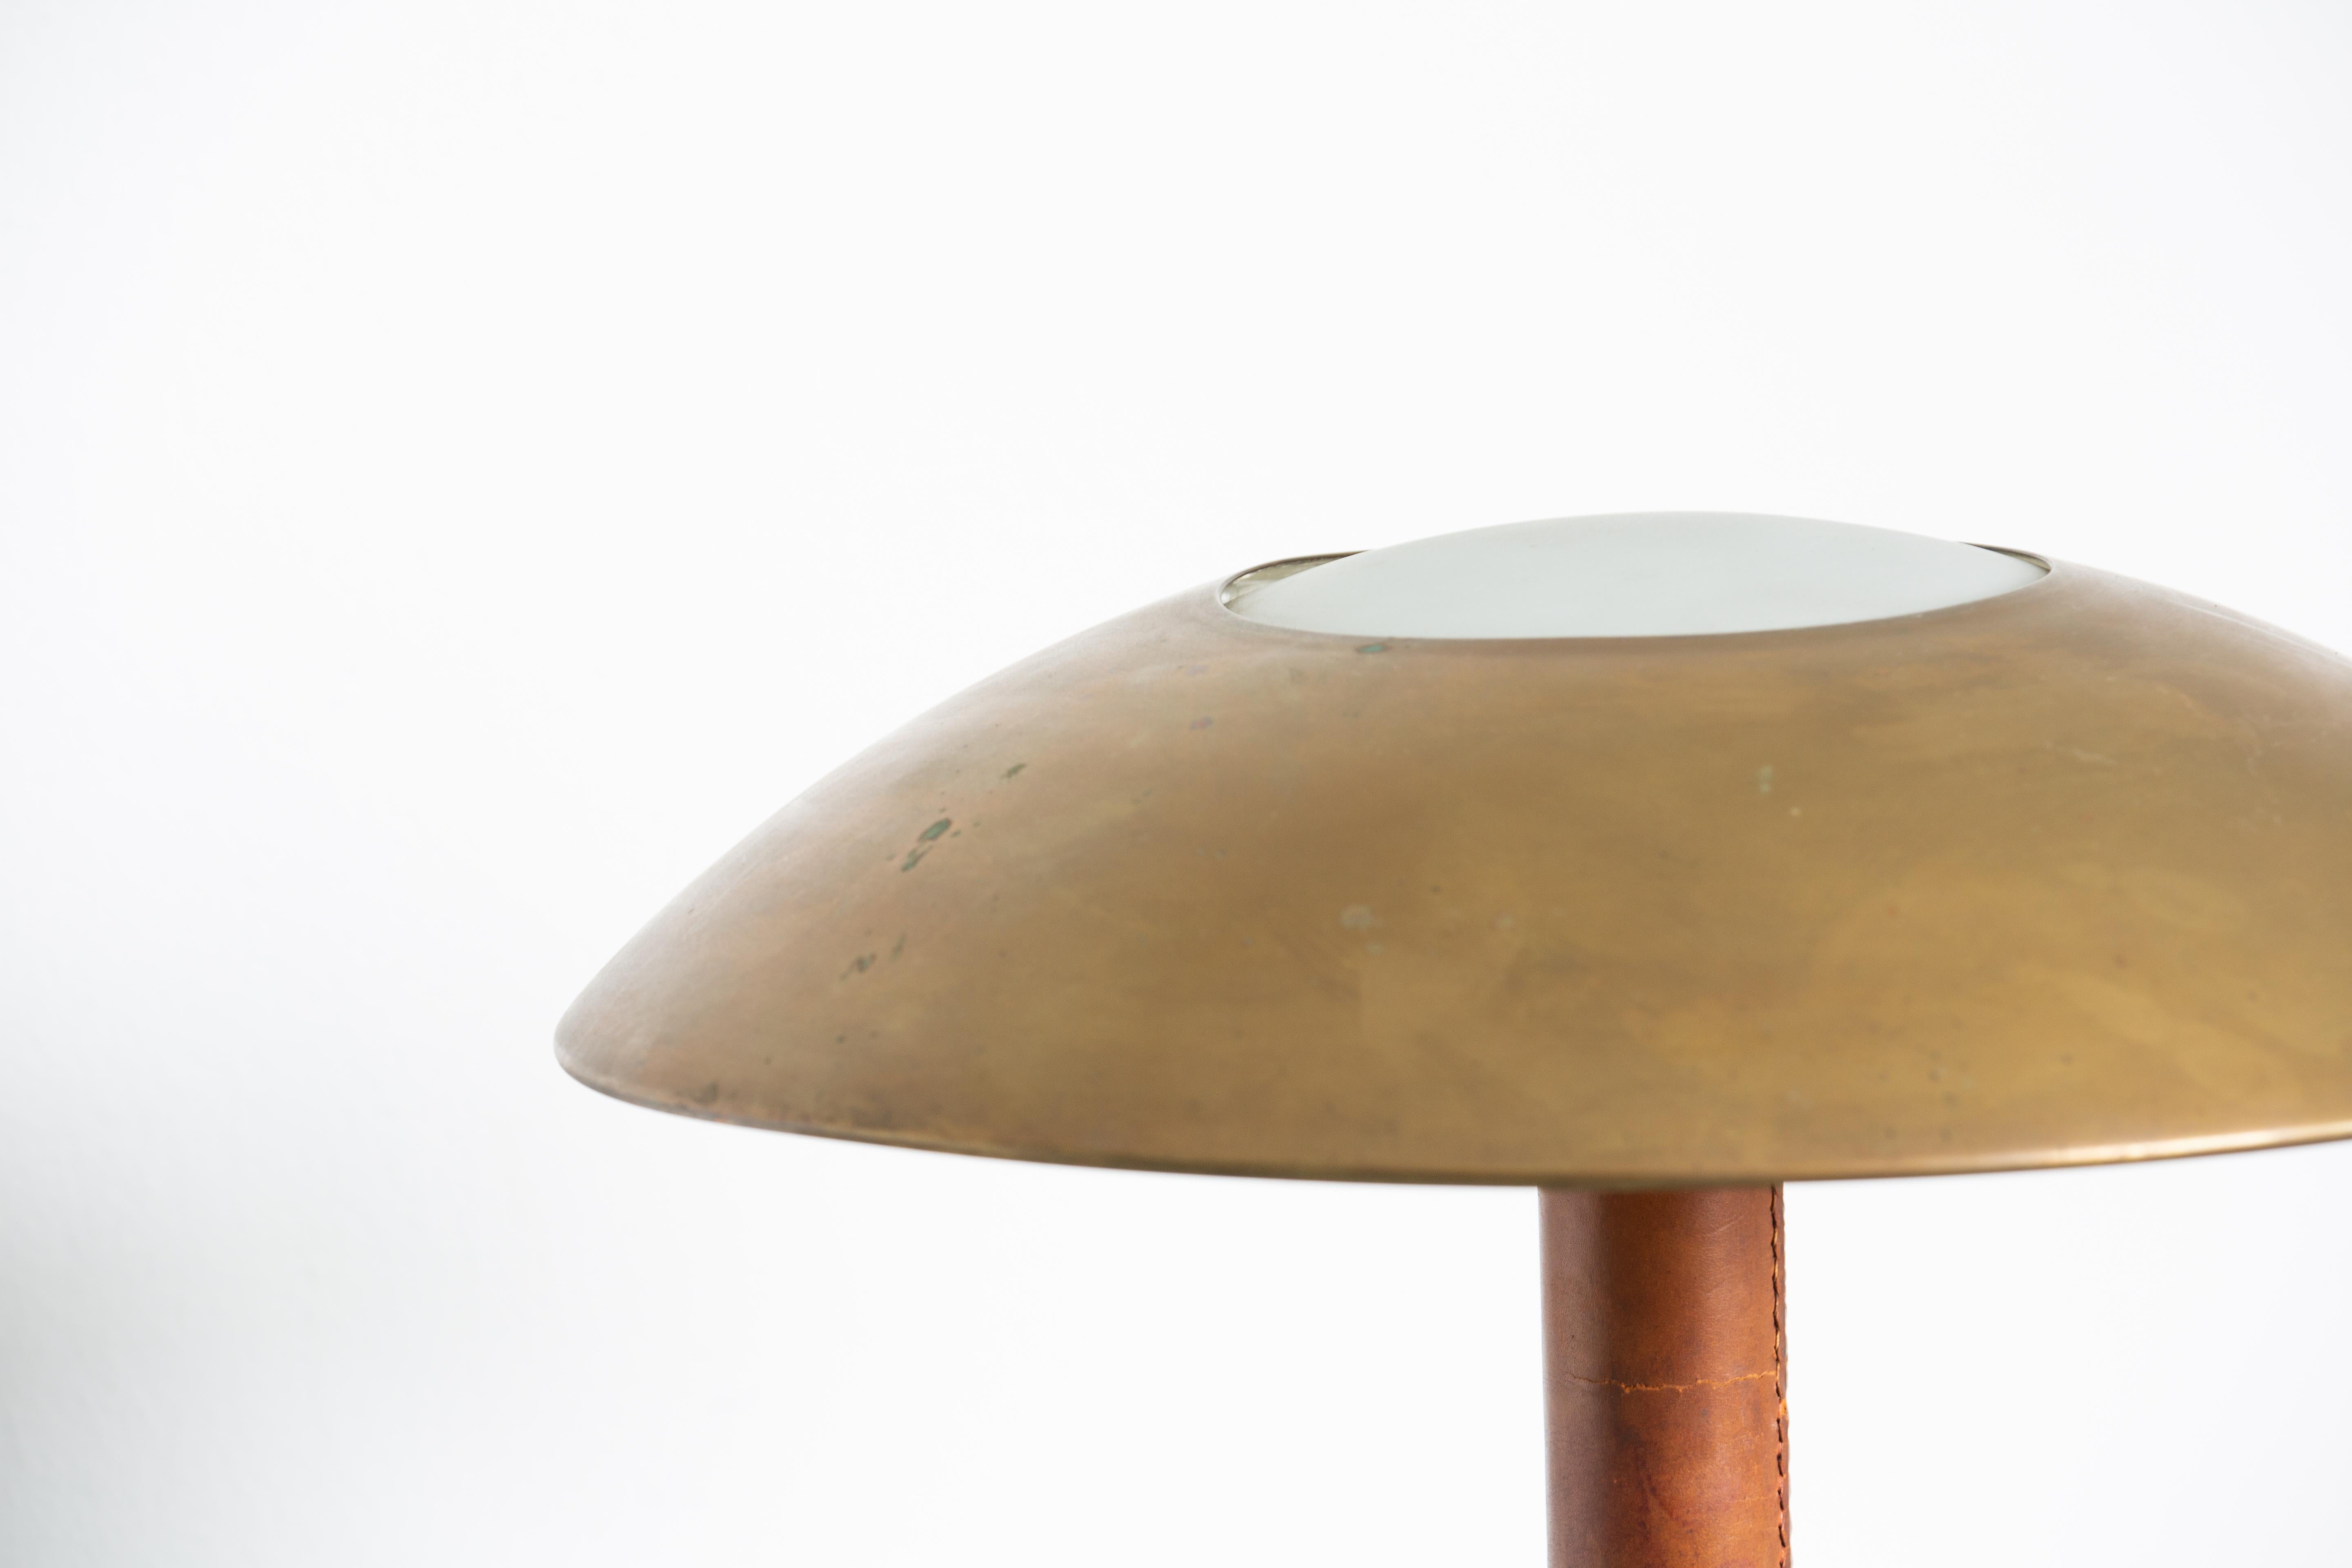 Mid-Century Modern Vintage Brass and Leather Table Lamp by Stilnovo, Italian Production, 1950s